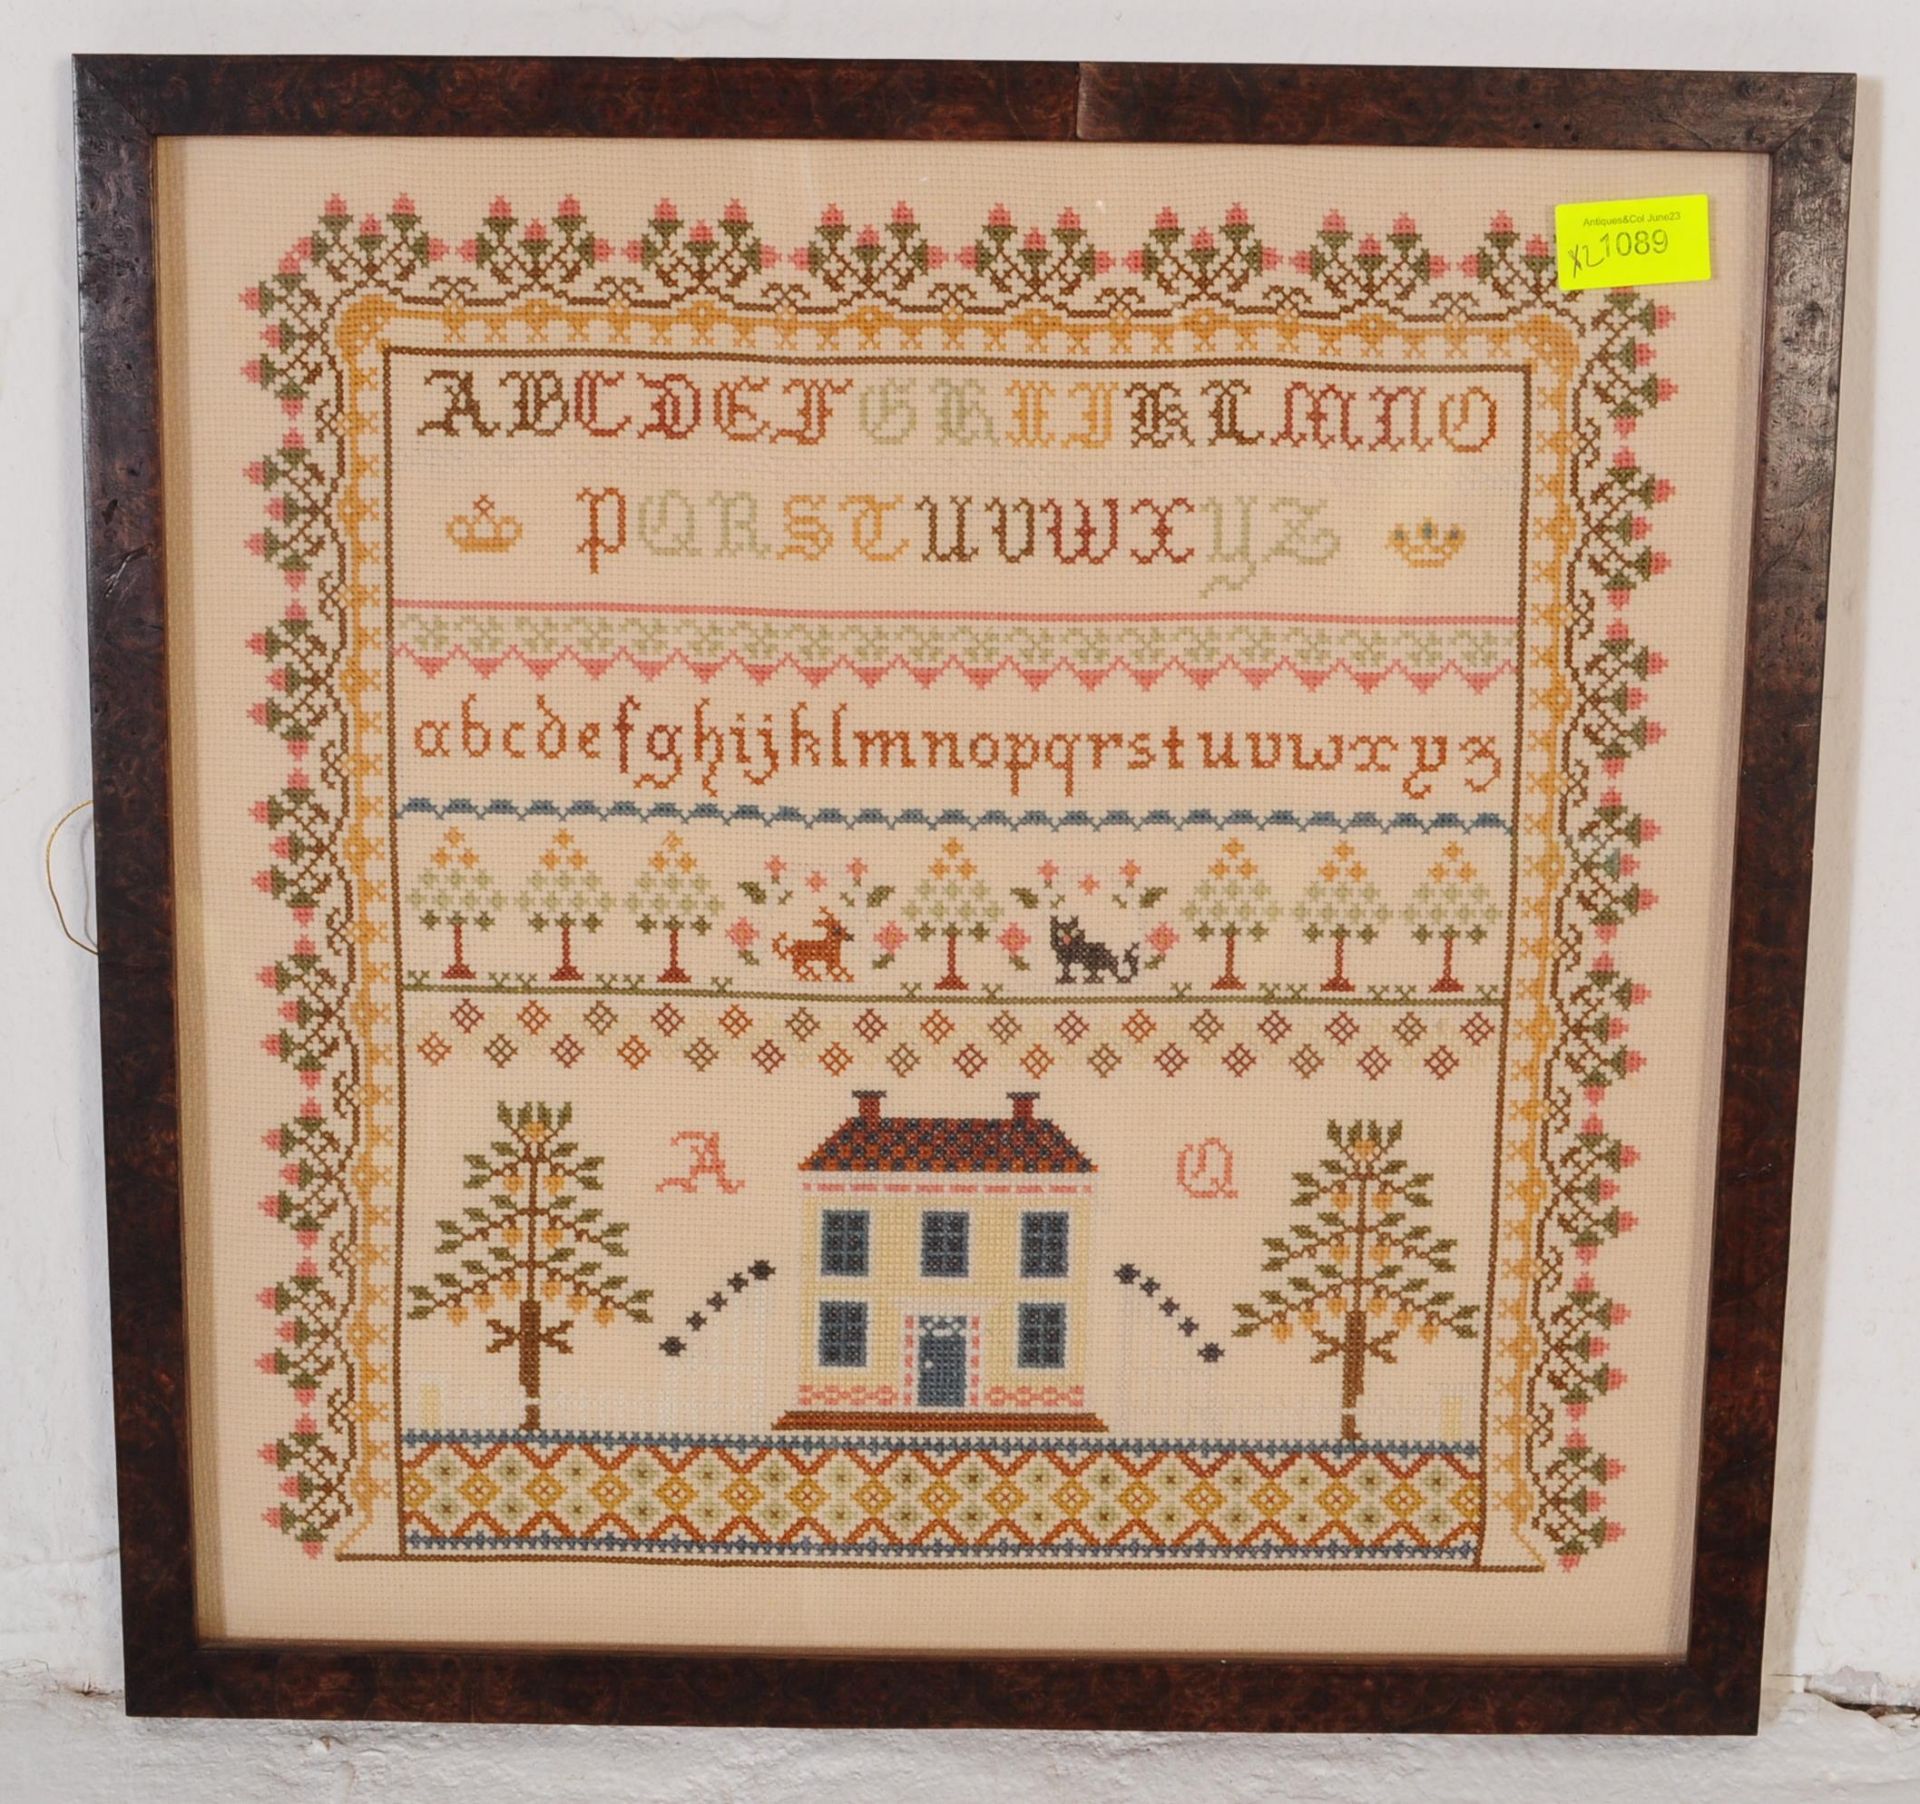 TWO 20TH CENTURY NEEDLEPOINT SAMPLERS - Image 2 of 5